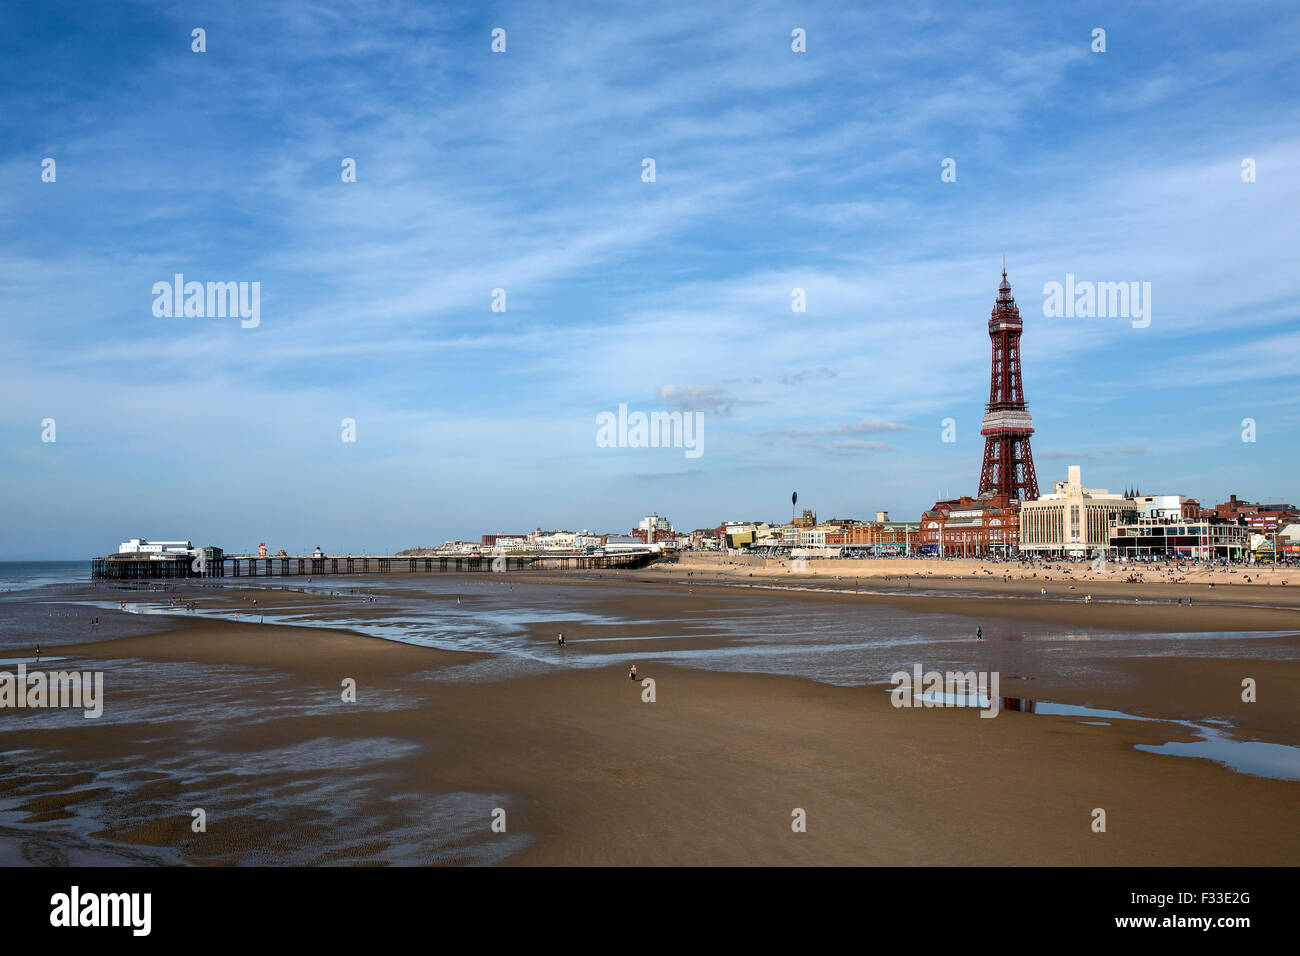 The old North Pier and Blackpool Tower in the seaside resort of Blackpool on the northwest coast of England. Stock Photo